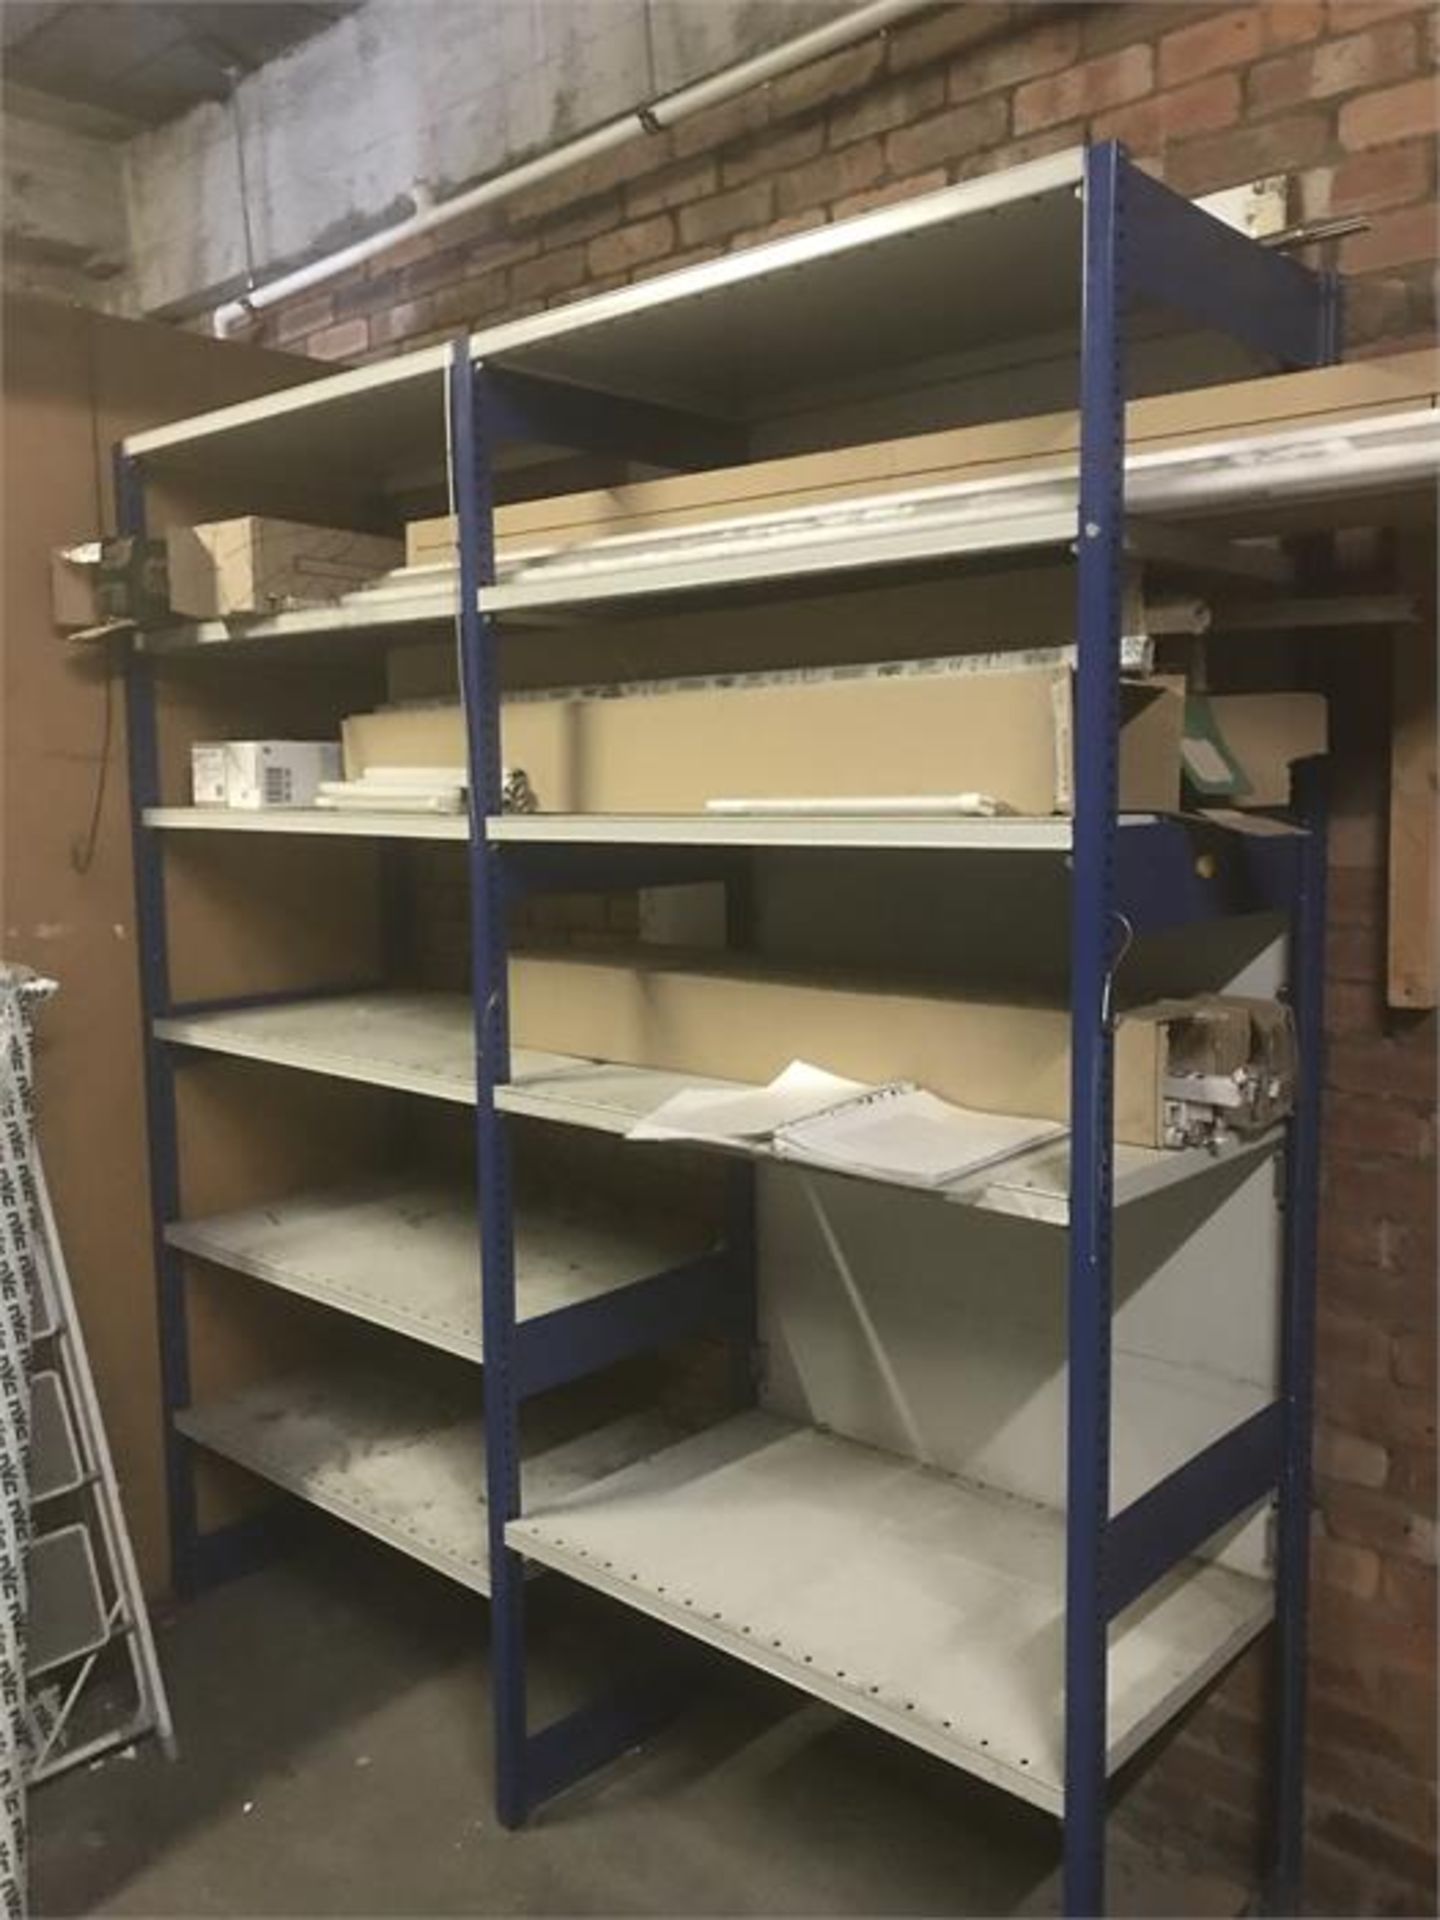 6 x bays boltless shelving, six tier - Image 3 of 3